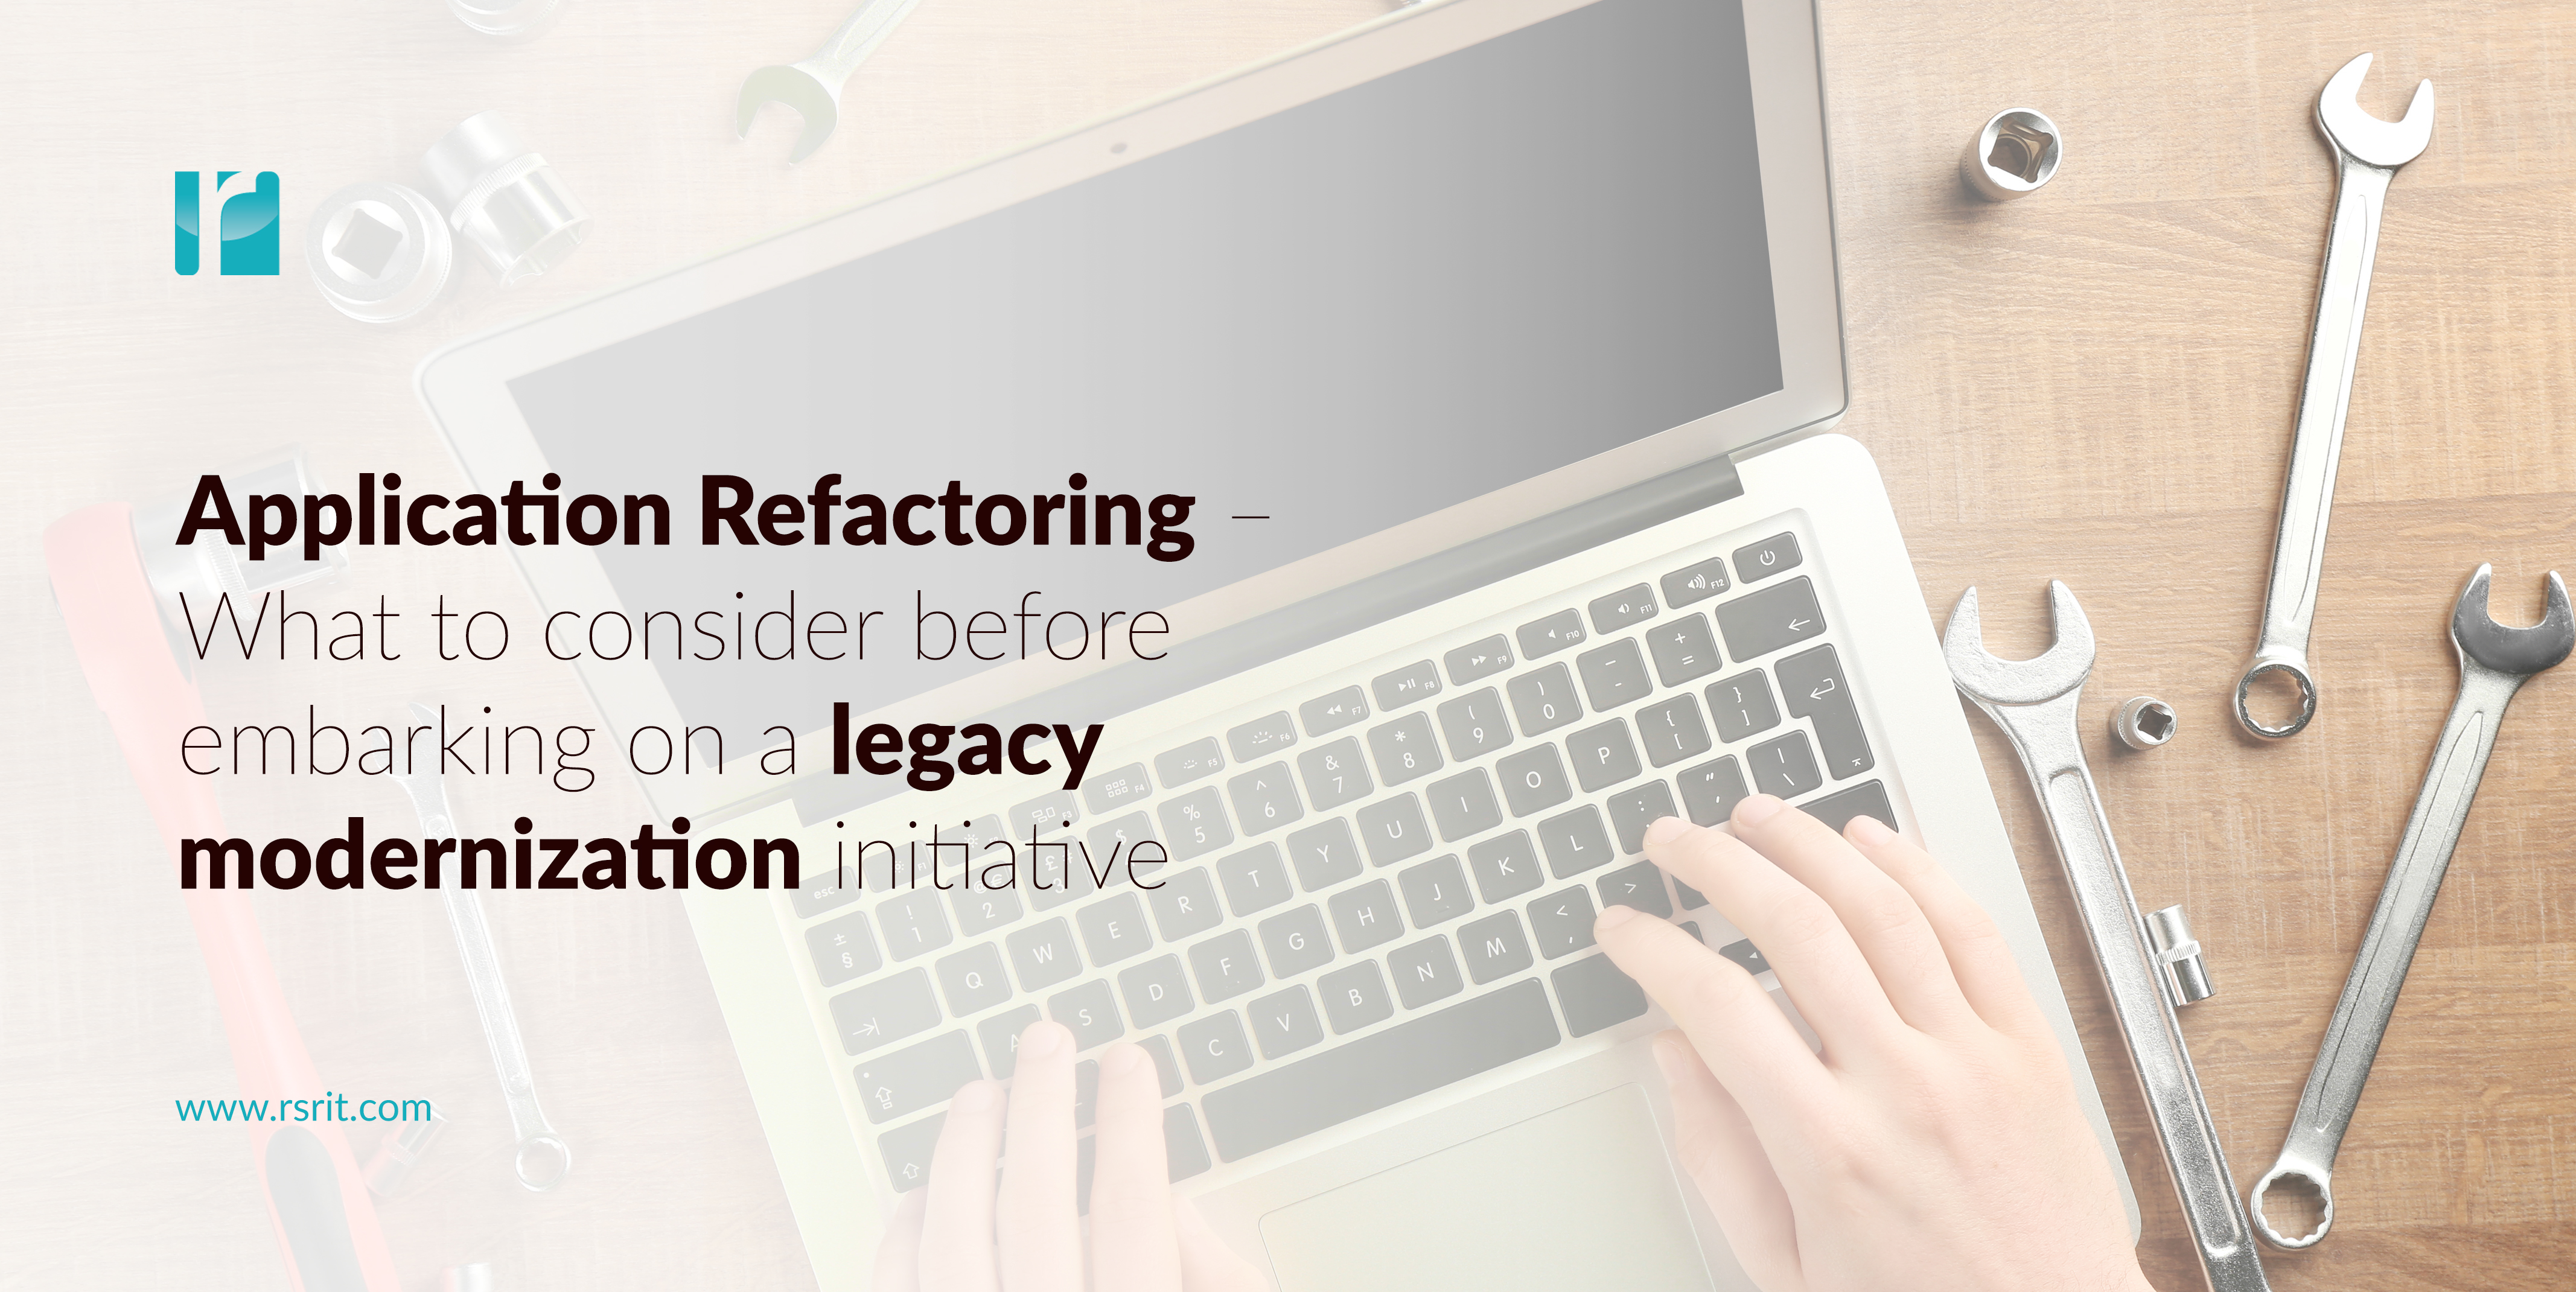 Application Refactoring – What to consider before embarking on a legacy modernization initiative